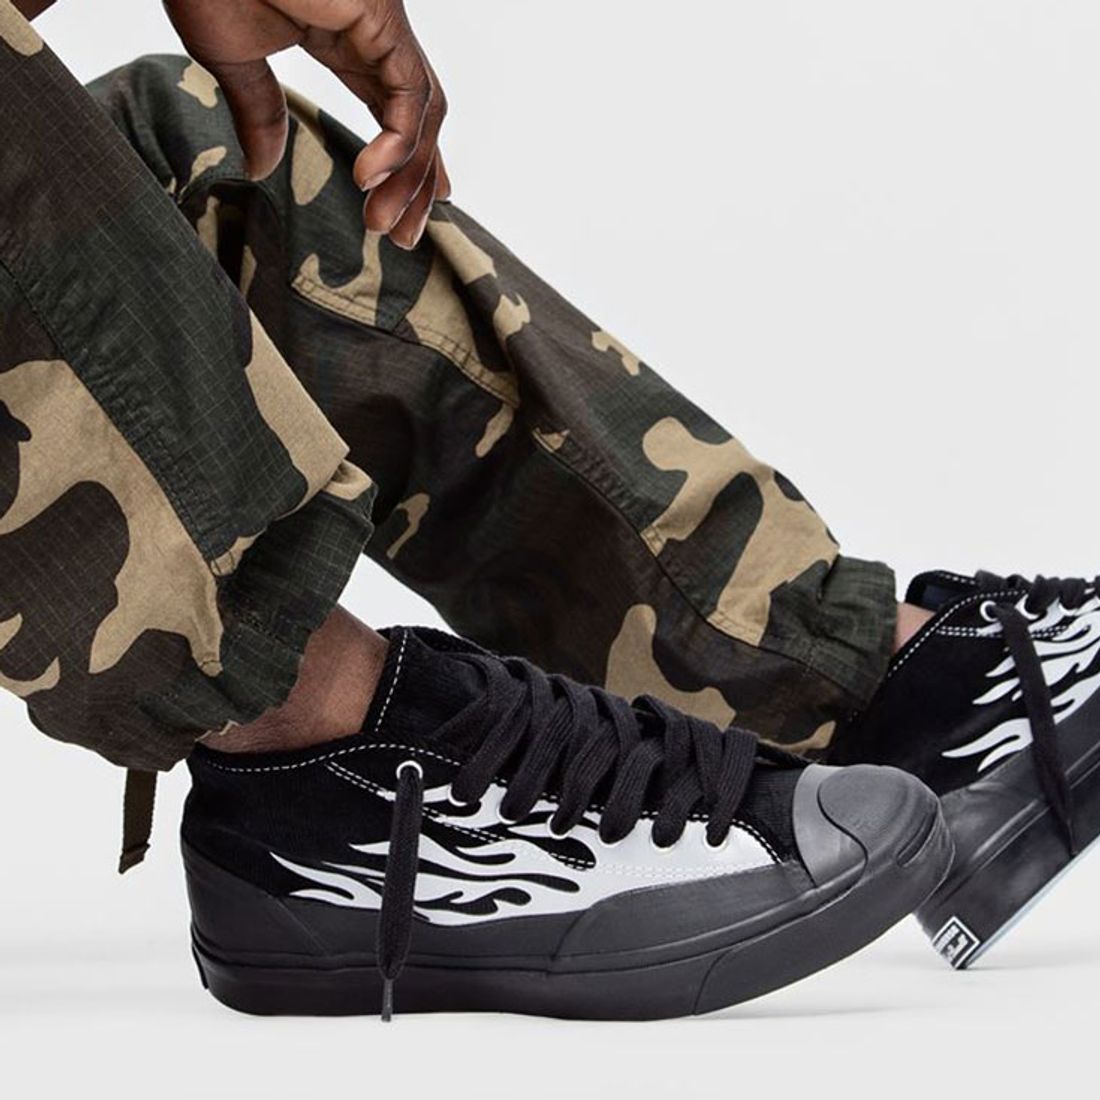 Here's How People are Styling the A$AP NAST Jack Purcell - Freaker